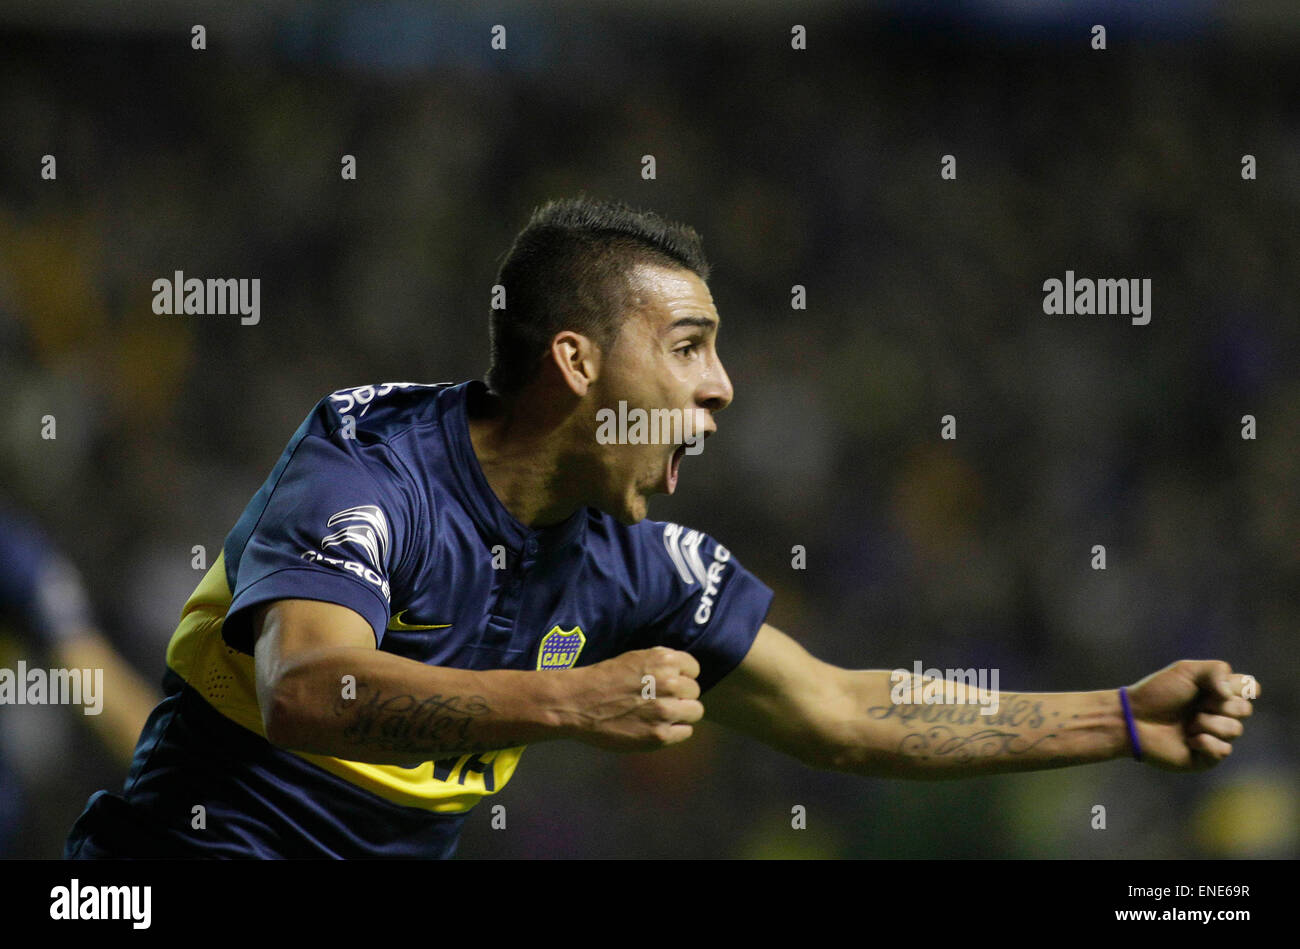 Buenos Aires, Argentina. 3rd May, 2015. Boca Juniors' Cristian Pavon celebrates during the 2015 Argentine first division against River Plate in the Diego J. Armando Stadium, Buenos Aires, capital of Argentina, May 3, 2015. Boca Juniors won 2-0. © Alberto Raggio/Xinhua/Alamy Live News Stock Photo